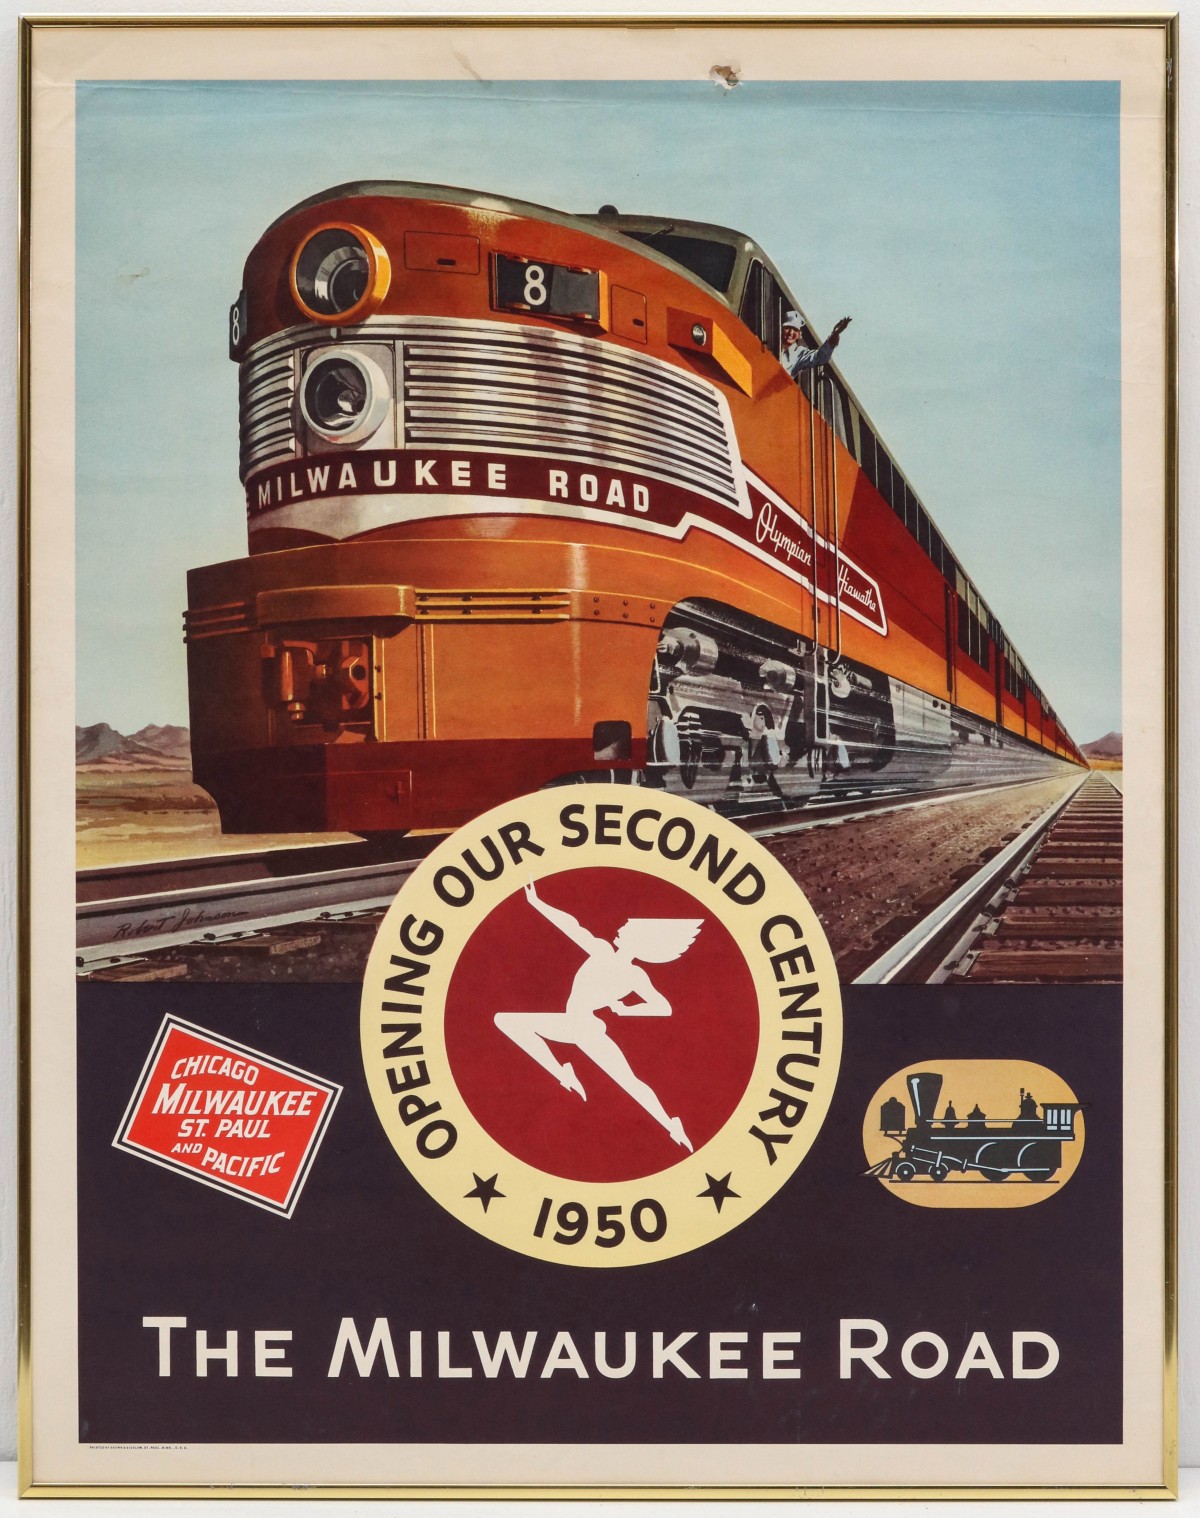 POSTER FOR THE OLYMPIAN HIAWATHA ON THE MILWAUKEE ROAD